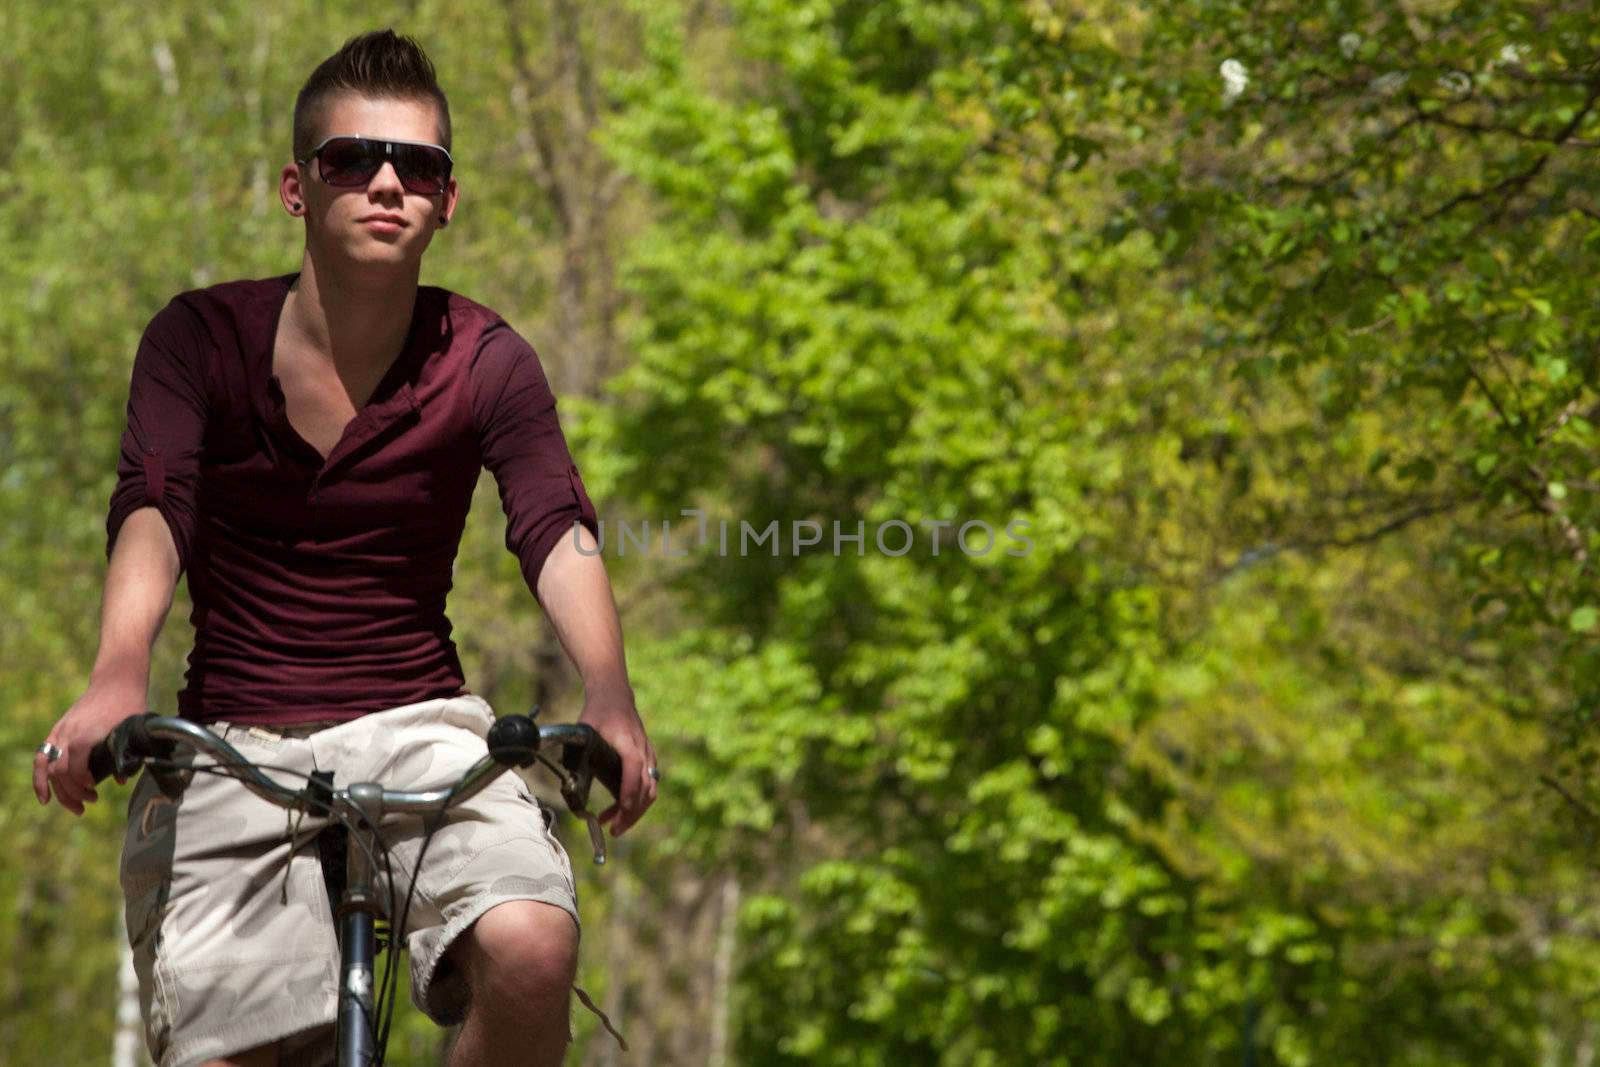 Young teenager is riding on his bicycle